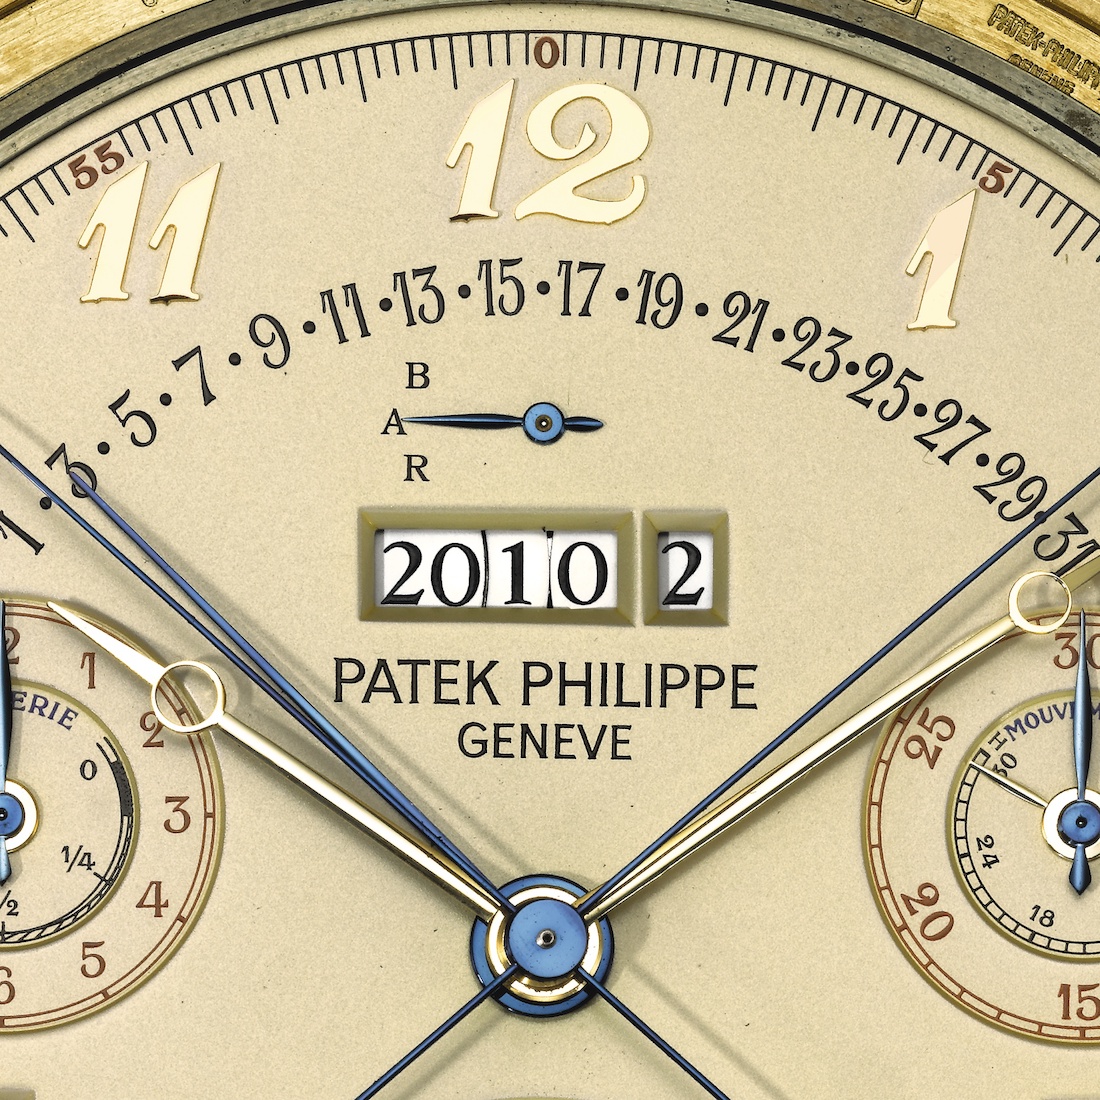 Patek Philippe Caliber 89 Grand Complication Pocket Watch Fails To Sell At Geneva Watch Auction Sales & Auctions 